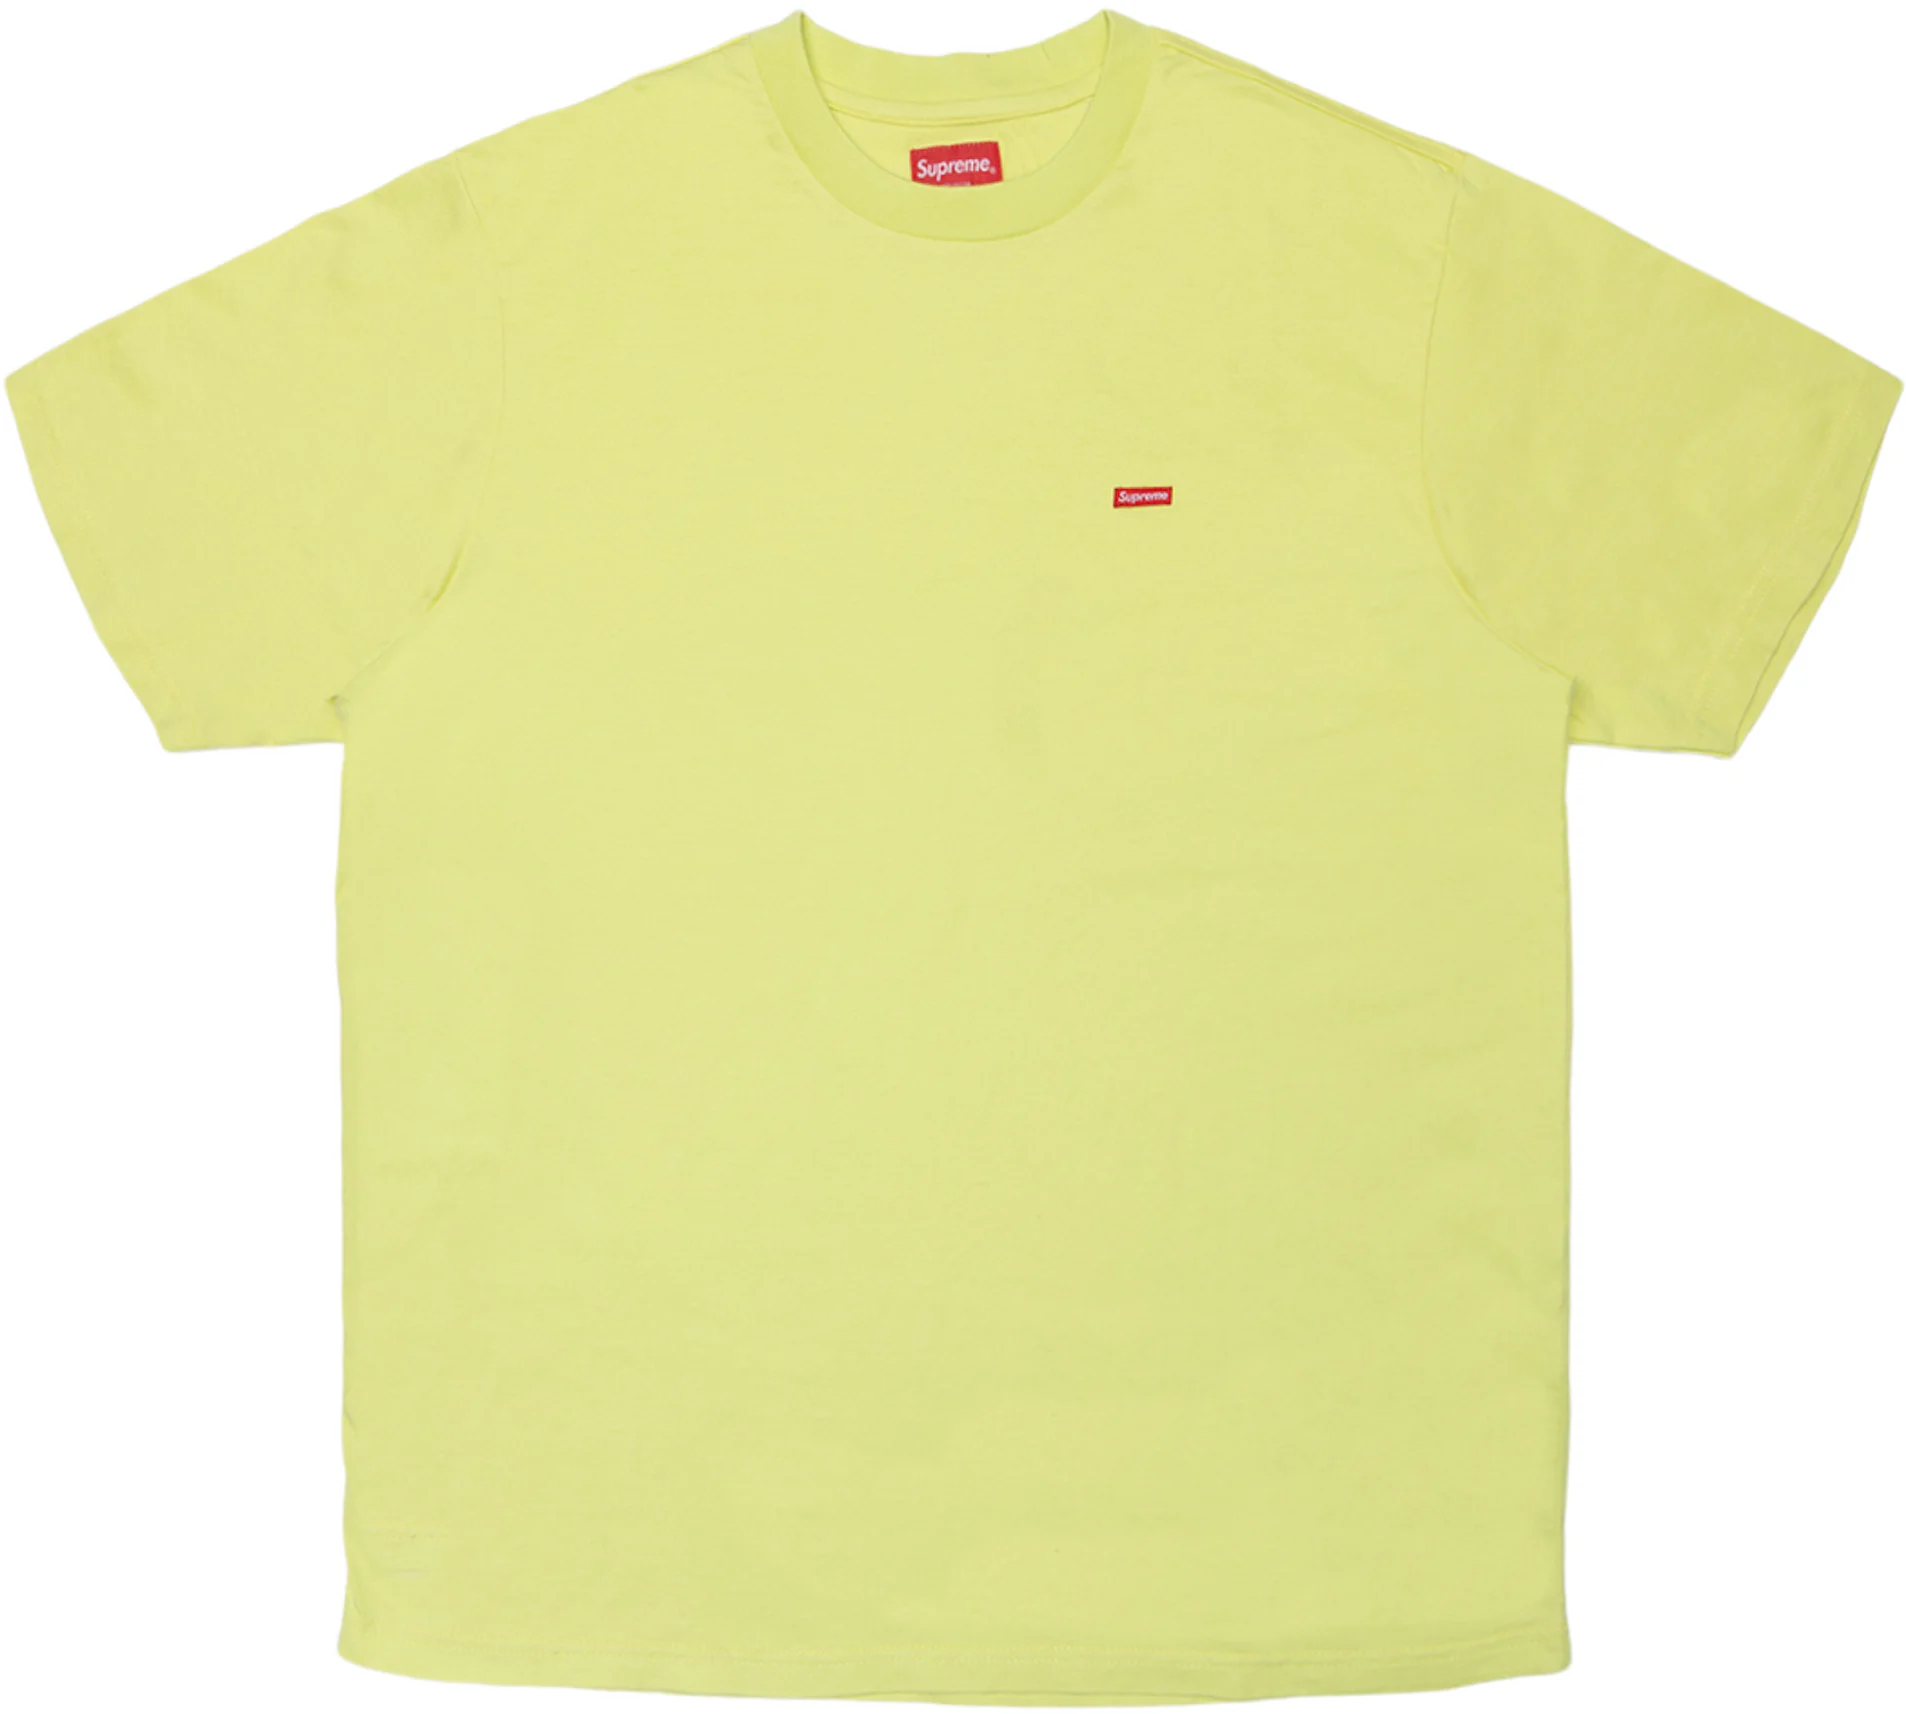 Supreme Everything Is Sh!t￼ T Shirt￼ Yellow Large SS20